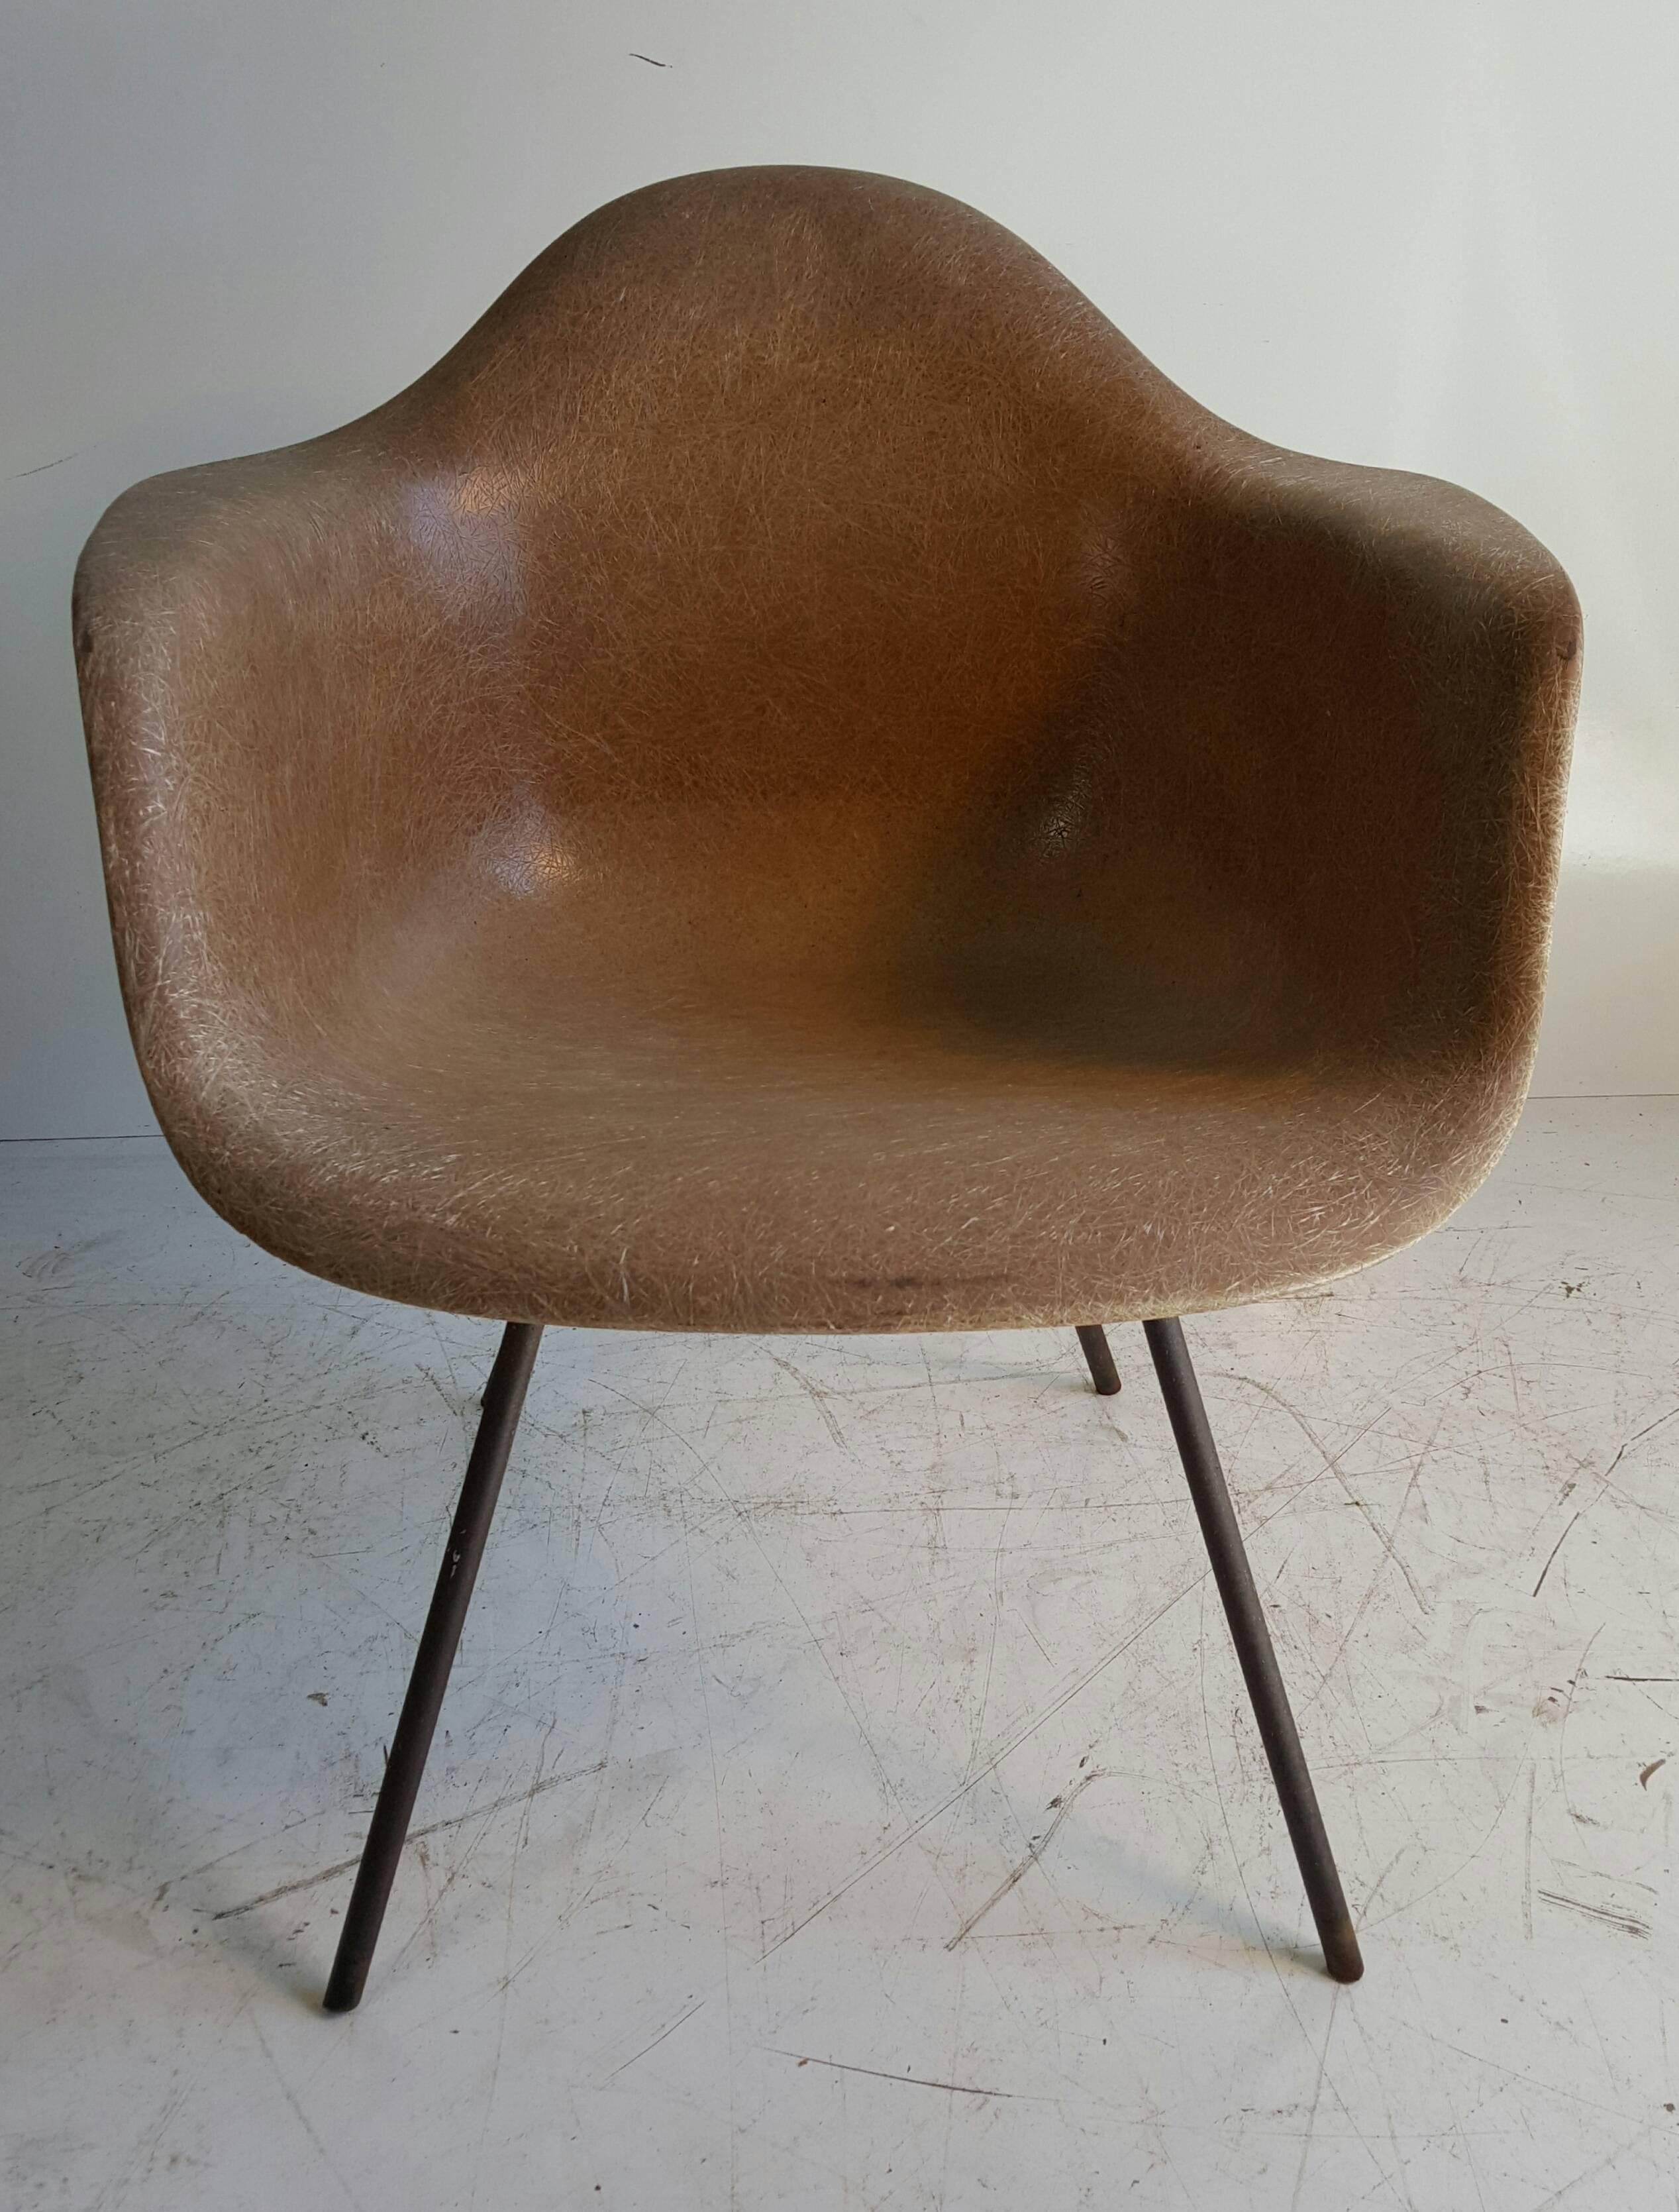 Classic Mid-Century fiberglass arm shell chair designed by Charles and Ray Eames, 2nd year production featuring early exposed fibers, heavy iron x base, large rubber shock monts, unusual color.